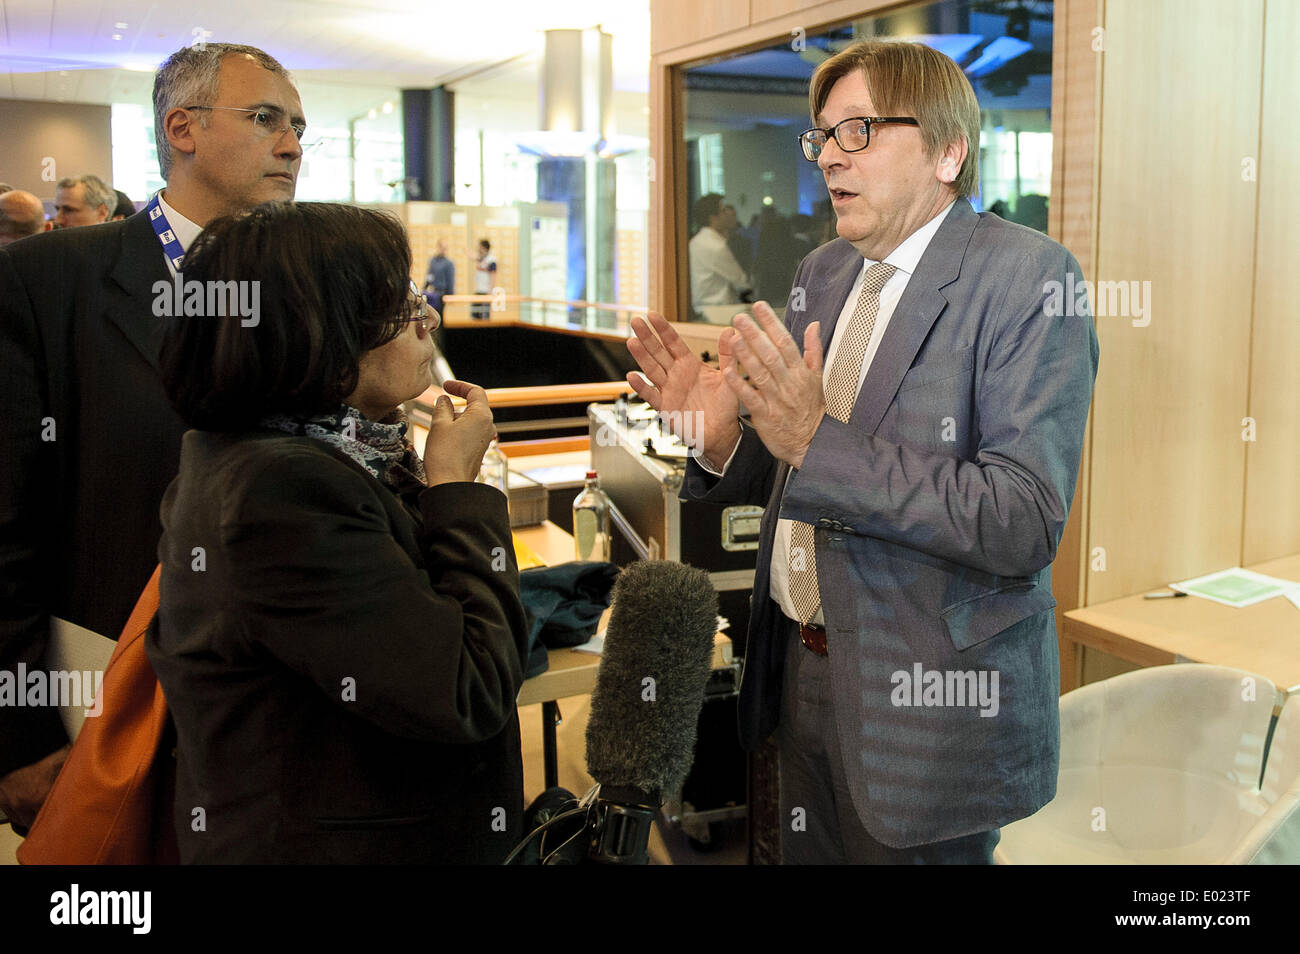 Brussels, Bxl, Belgium. 29th Apr, 2014. Guy Verhofstadt, top candidate of Liberals (ALDE) talks to the press ahead of Euranet's 'Big Crunch' Presidential debate at the EU parliament in Brussels, Belgium on 29.04.2014 The four top candidates for the presidency of the European Commission - Jean-Claude Juncker, Ska Keller, Martin Schulz and Guy Verhofstadt - attend EU-wide debate organized by EuranetPlus and focused on the major election topics. by Wiktor Dabkowski Credit:  Wiktor Dabkowski/ZUMAPRESS.com/Alamy Live News Stock Photo